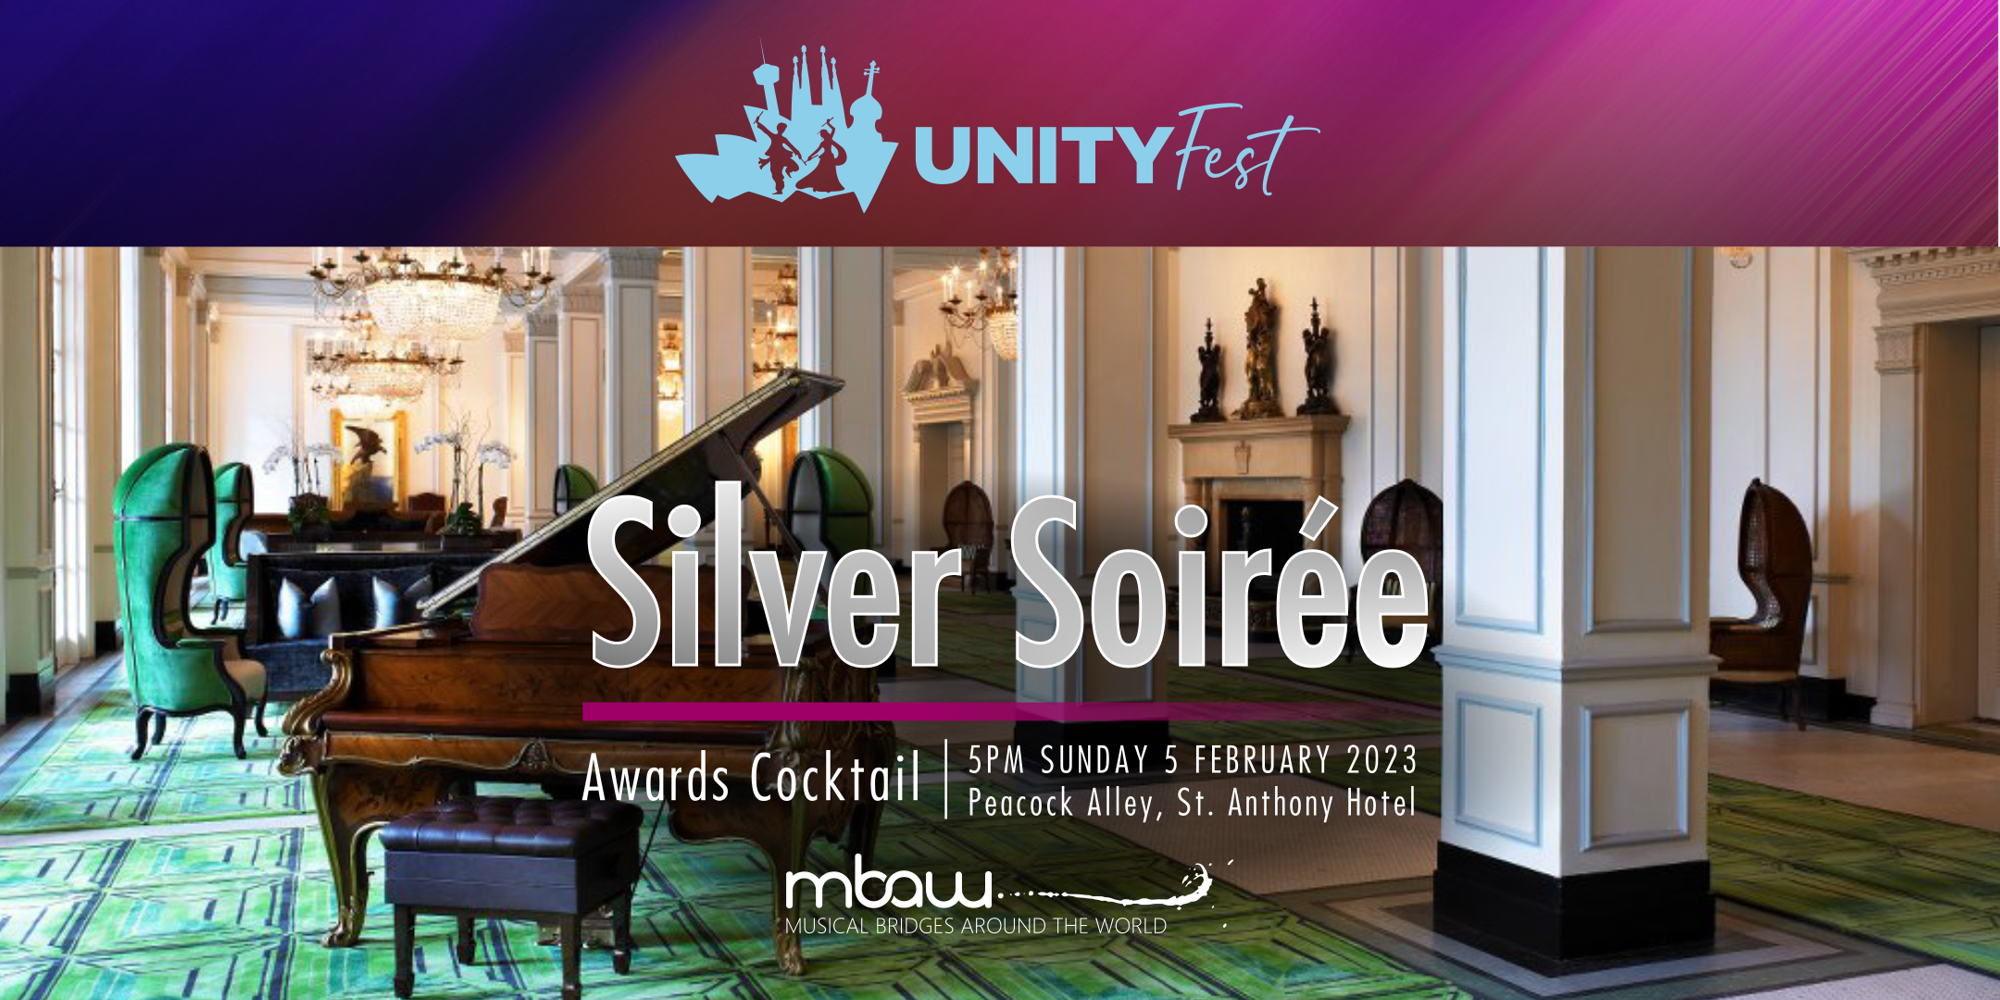 Silver Soiree: Awards Cocktail | UNITYFest promotional image